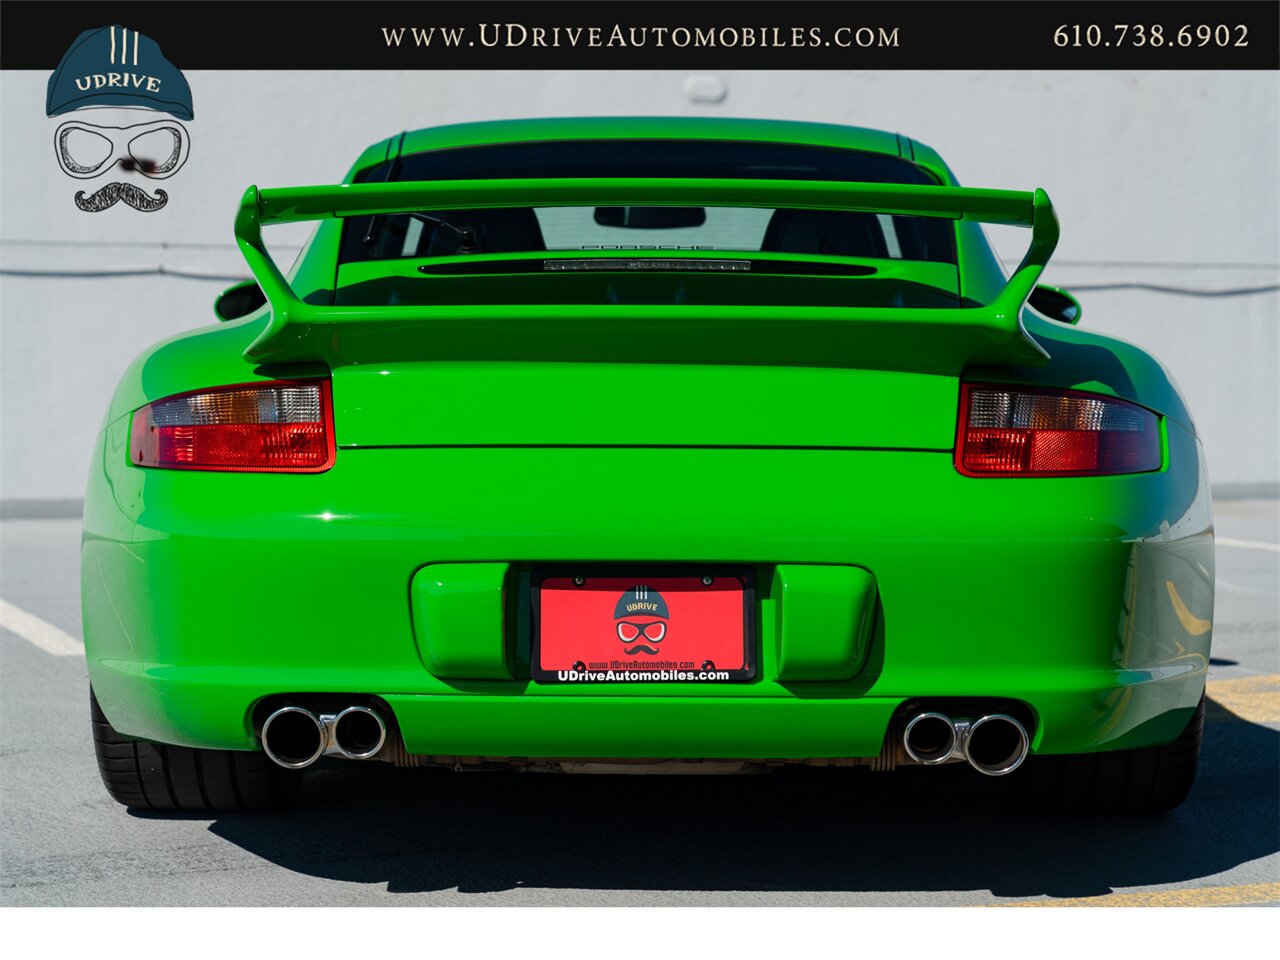 2006 Porsche 911 Carrera 4S  997 PTS Signal Green 6Sp Sport Sts Spt Chrono Spt Exhst - Photo 23 - West Chester, PA 19382